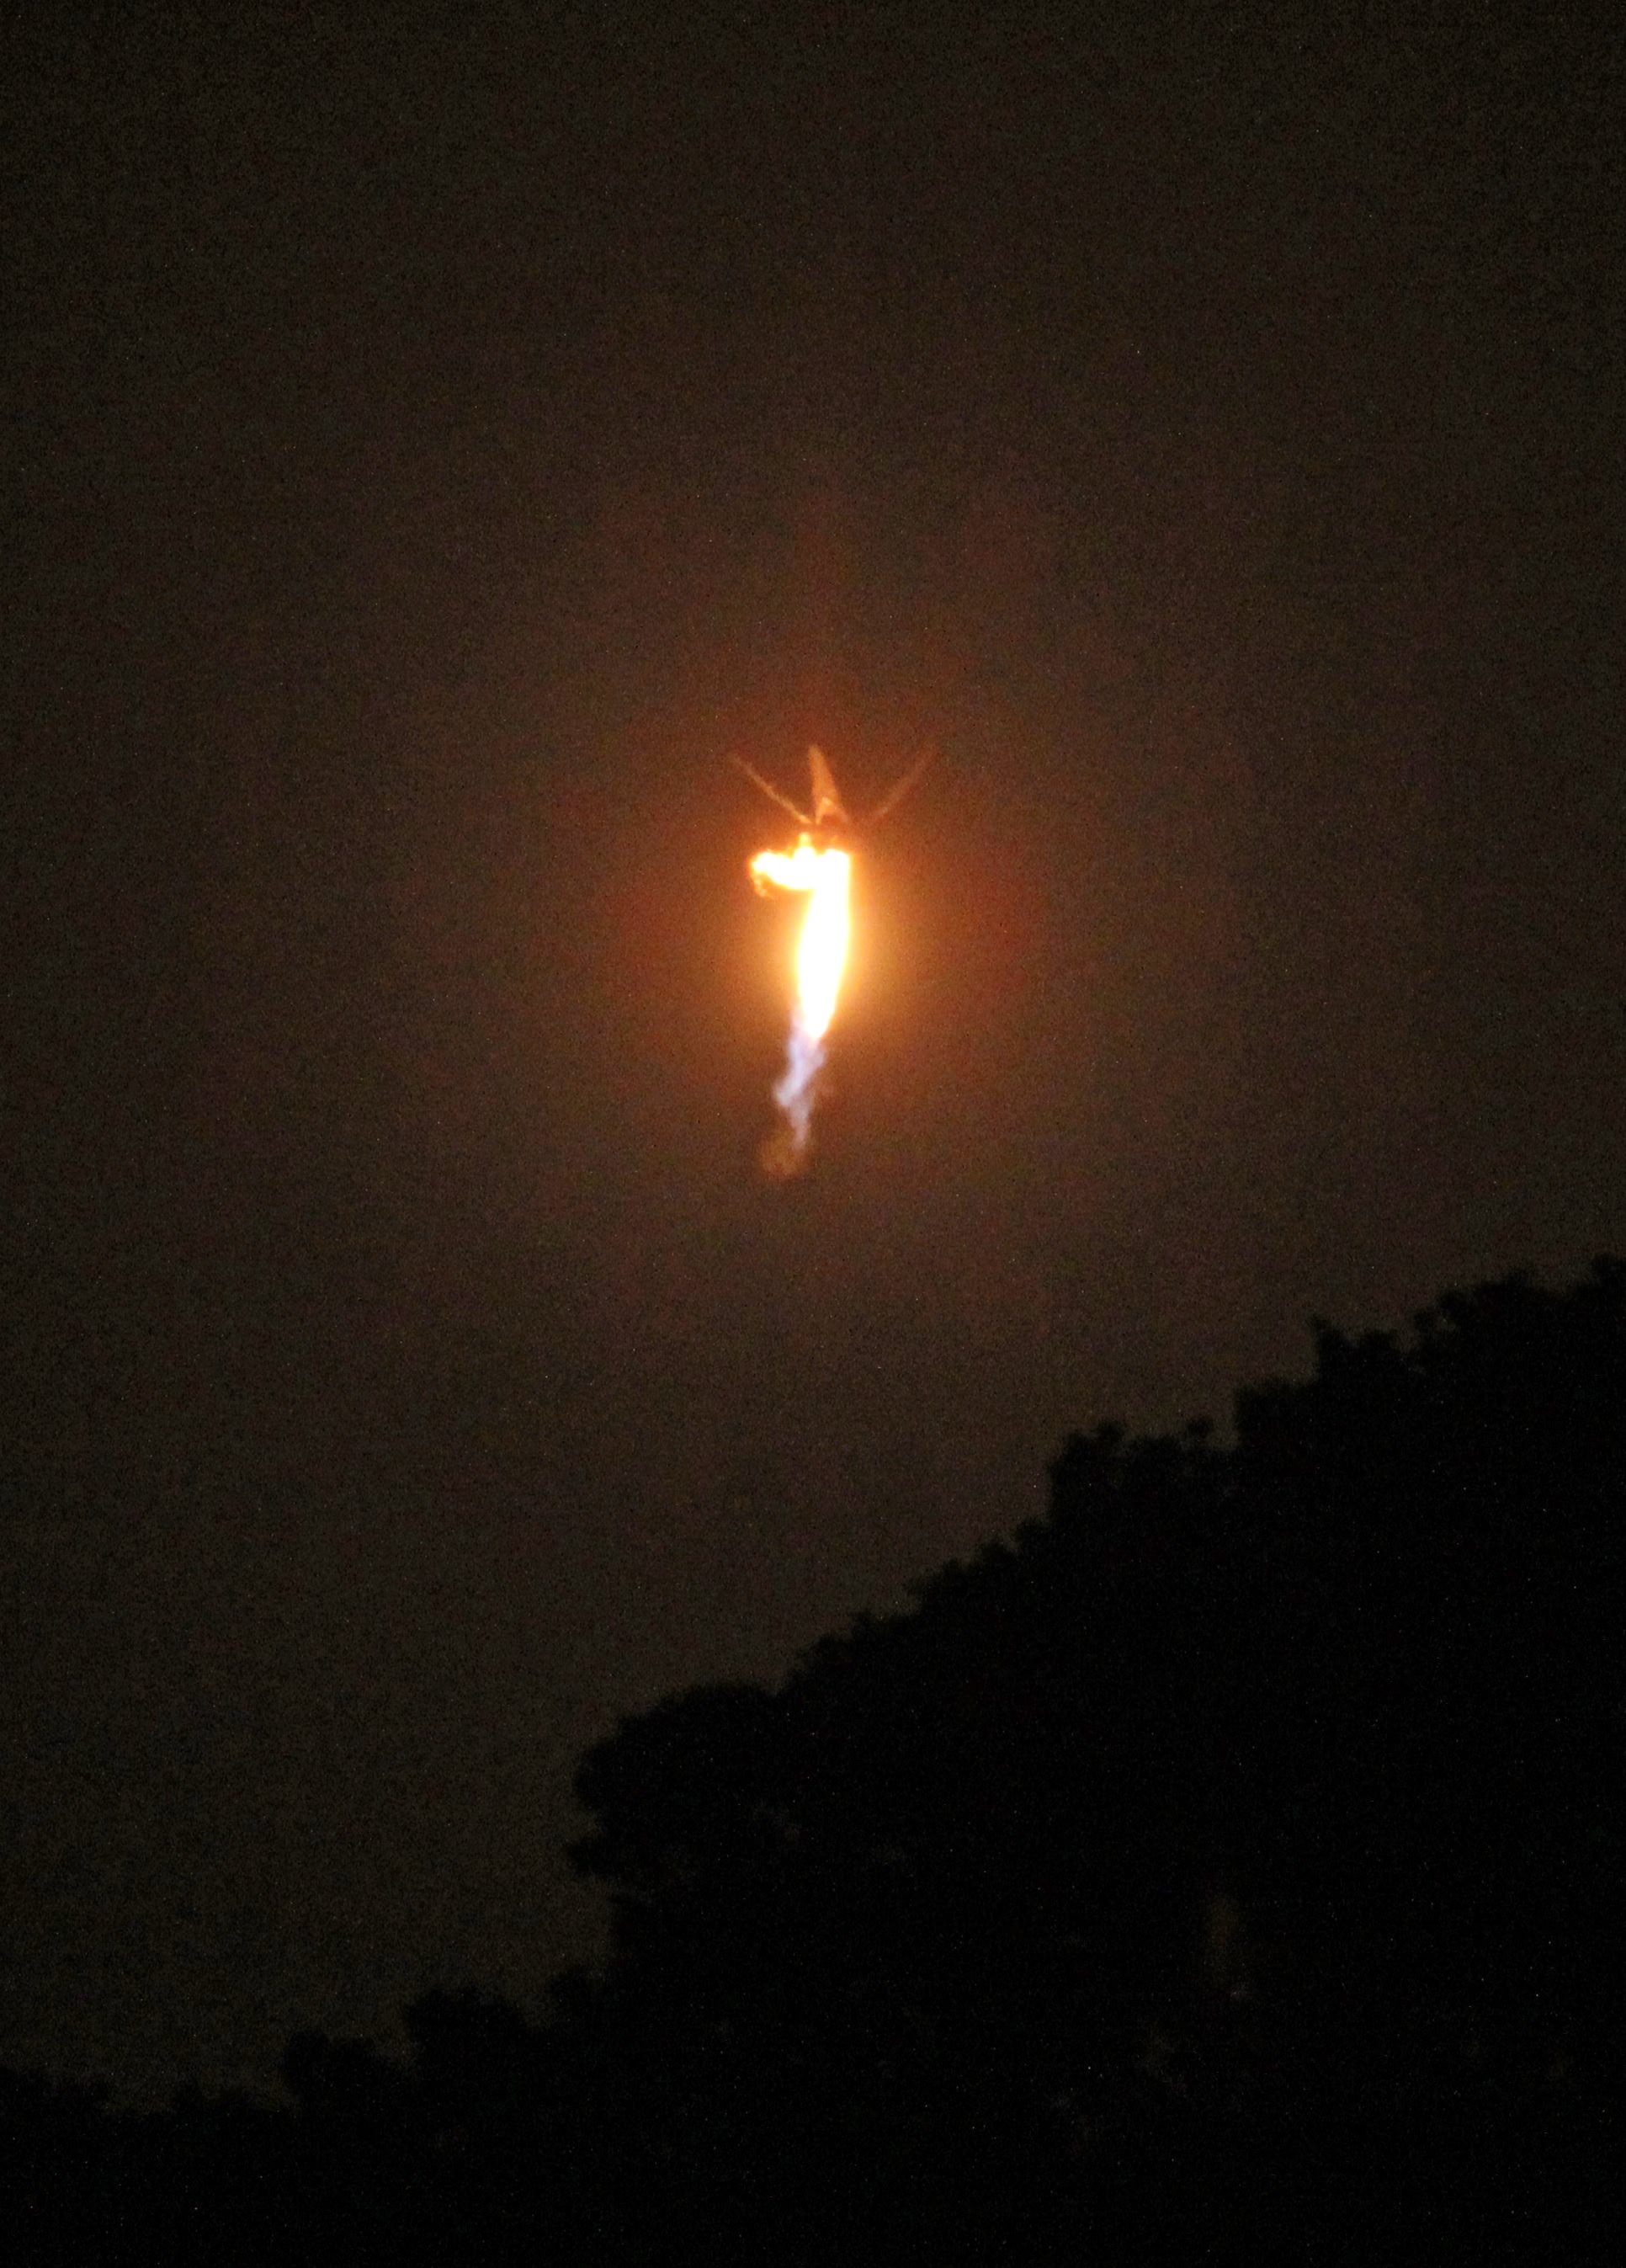 SpaceX Falcon 9 in final seconds of descent to successful touchdown at Landing Zone 1 on Dec 21, 2015. Credit: Chuck Higgins 